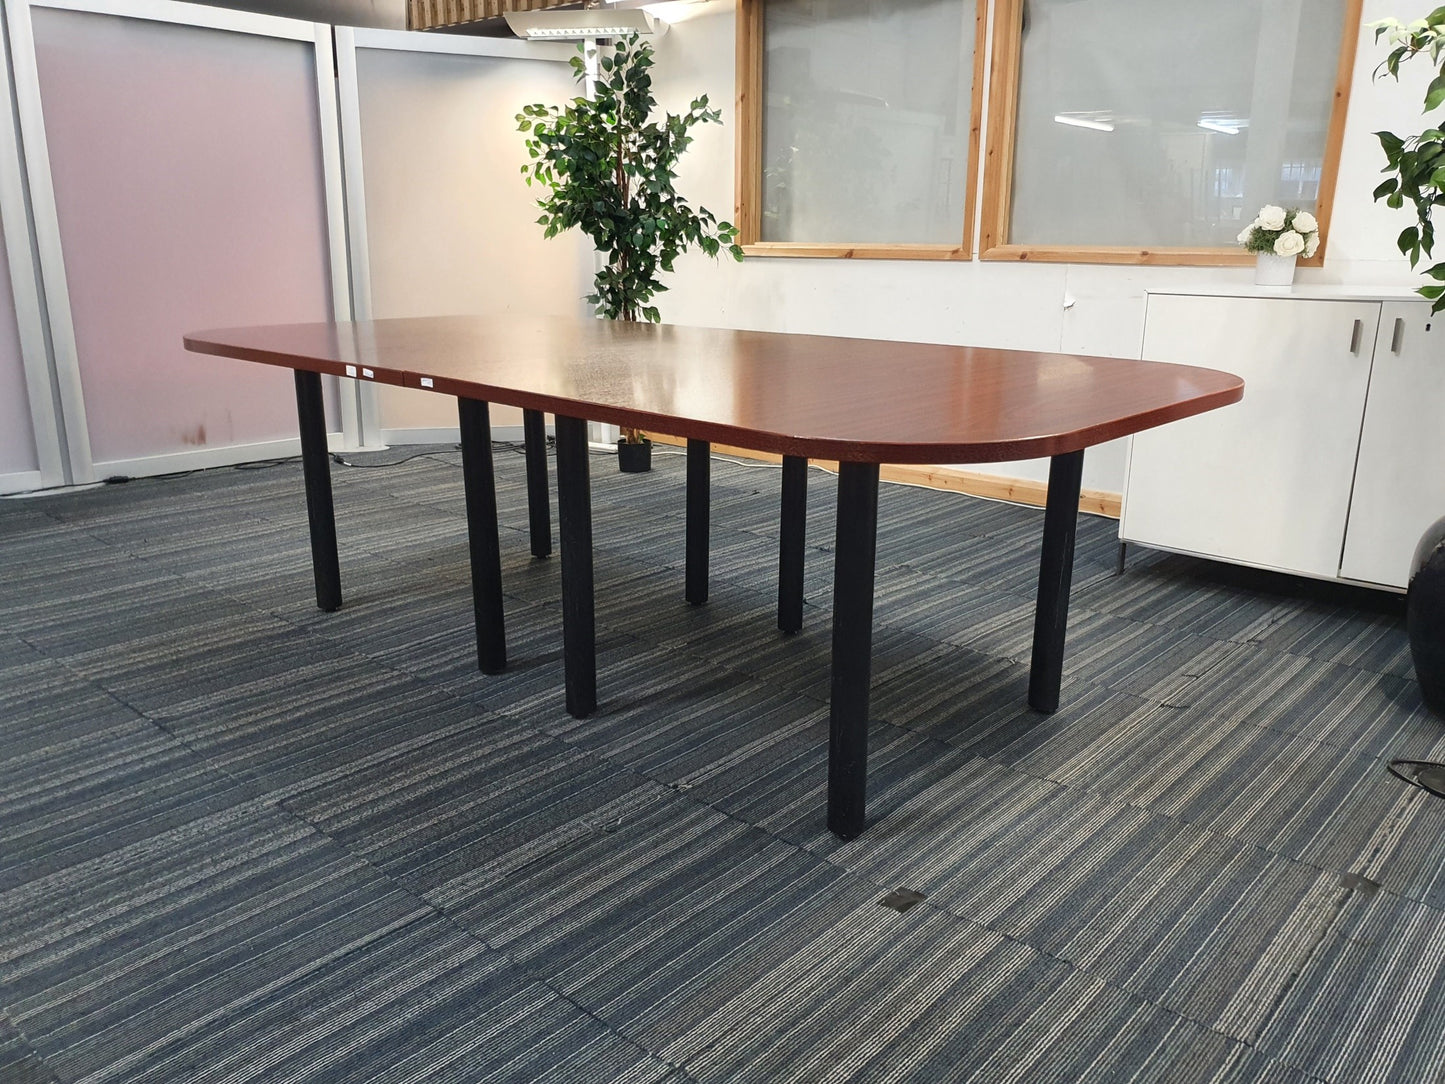 Cherry walnut meeting table with black legs